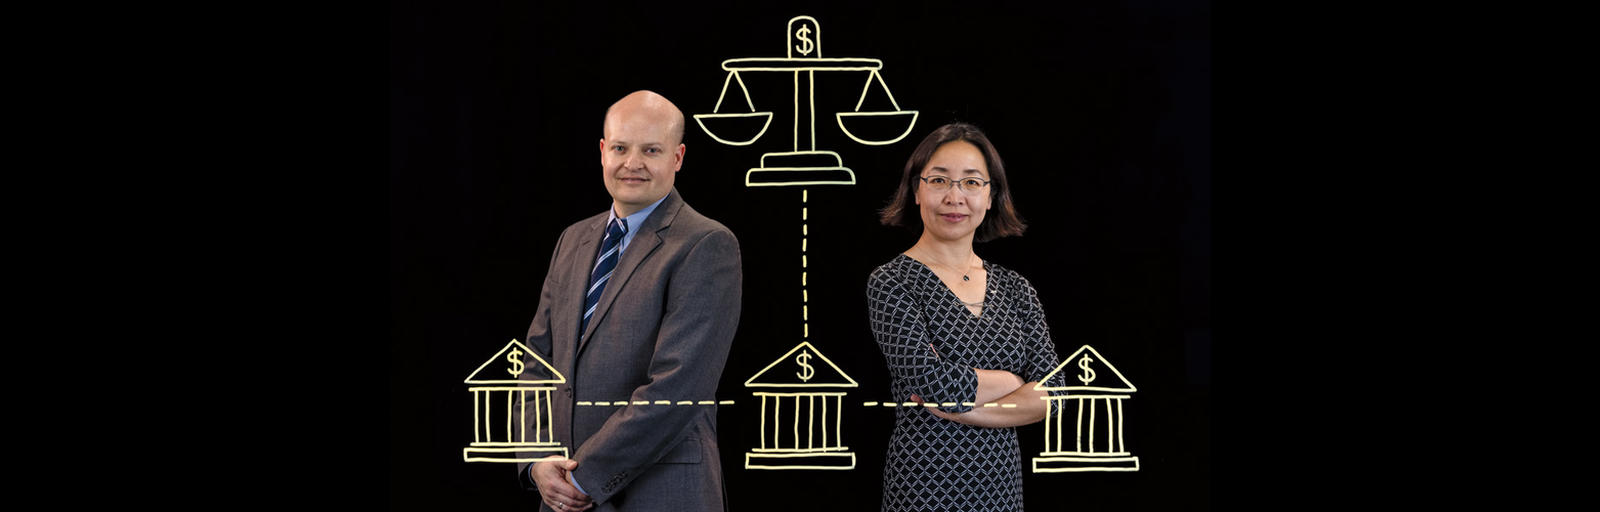 Michael Iselin and Helen Zhang stand behind an illustration depicting a network of banks and mutual funds.